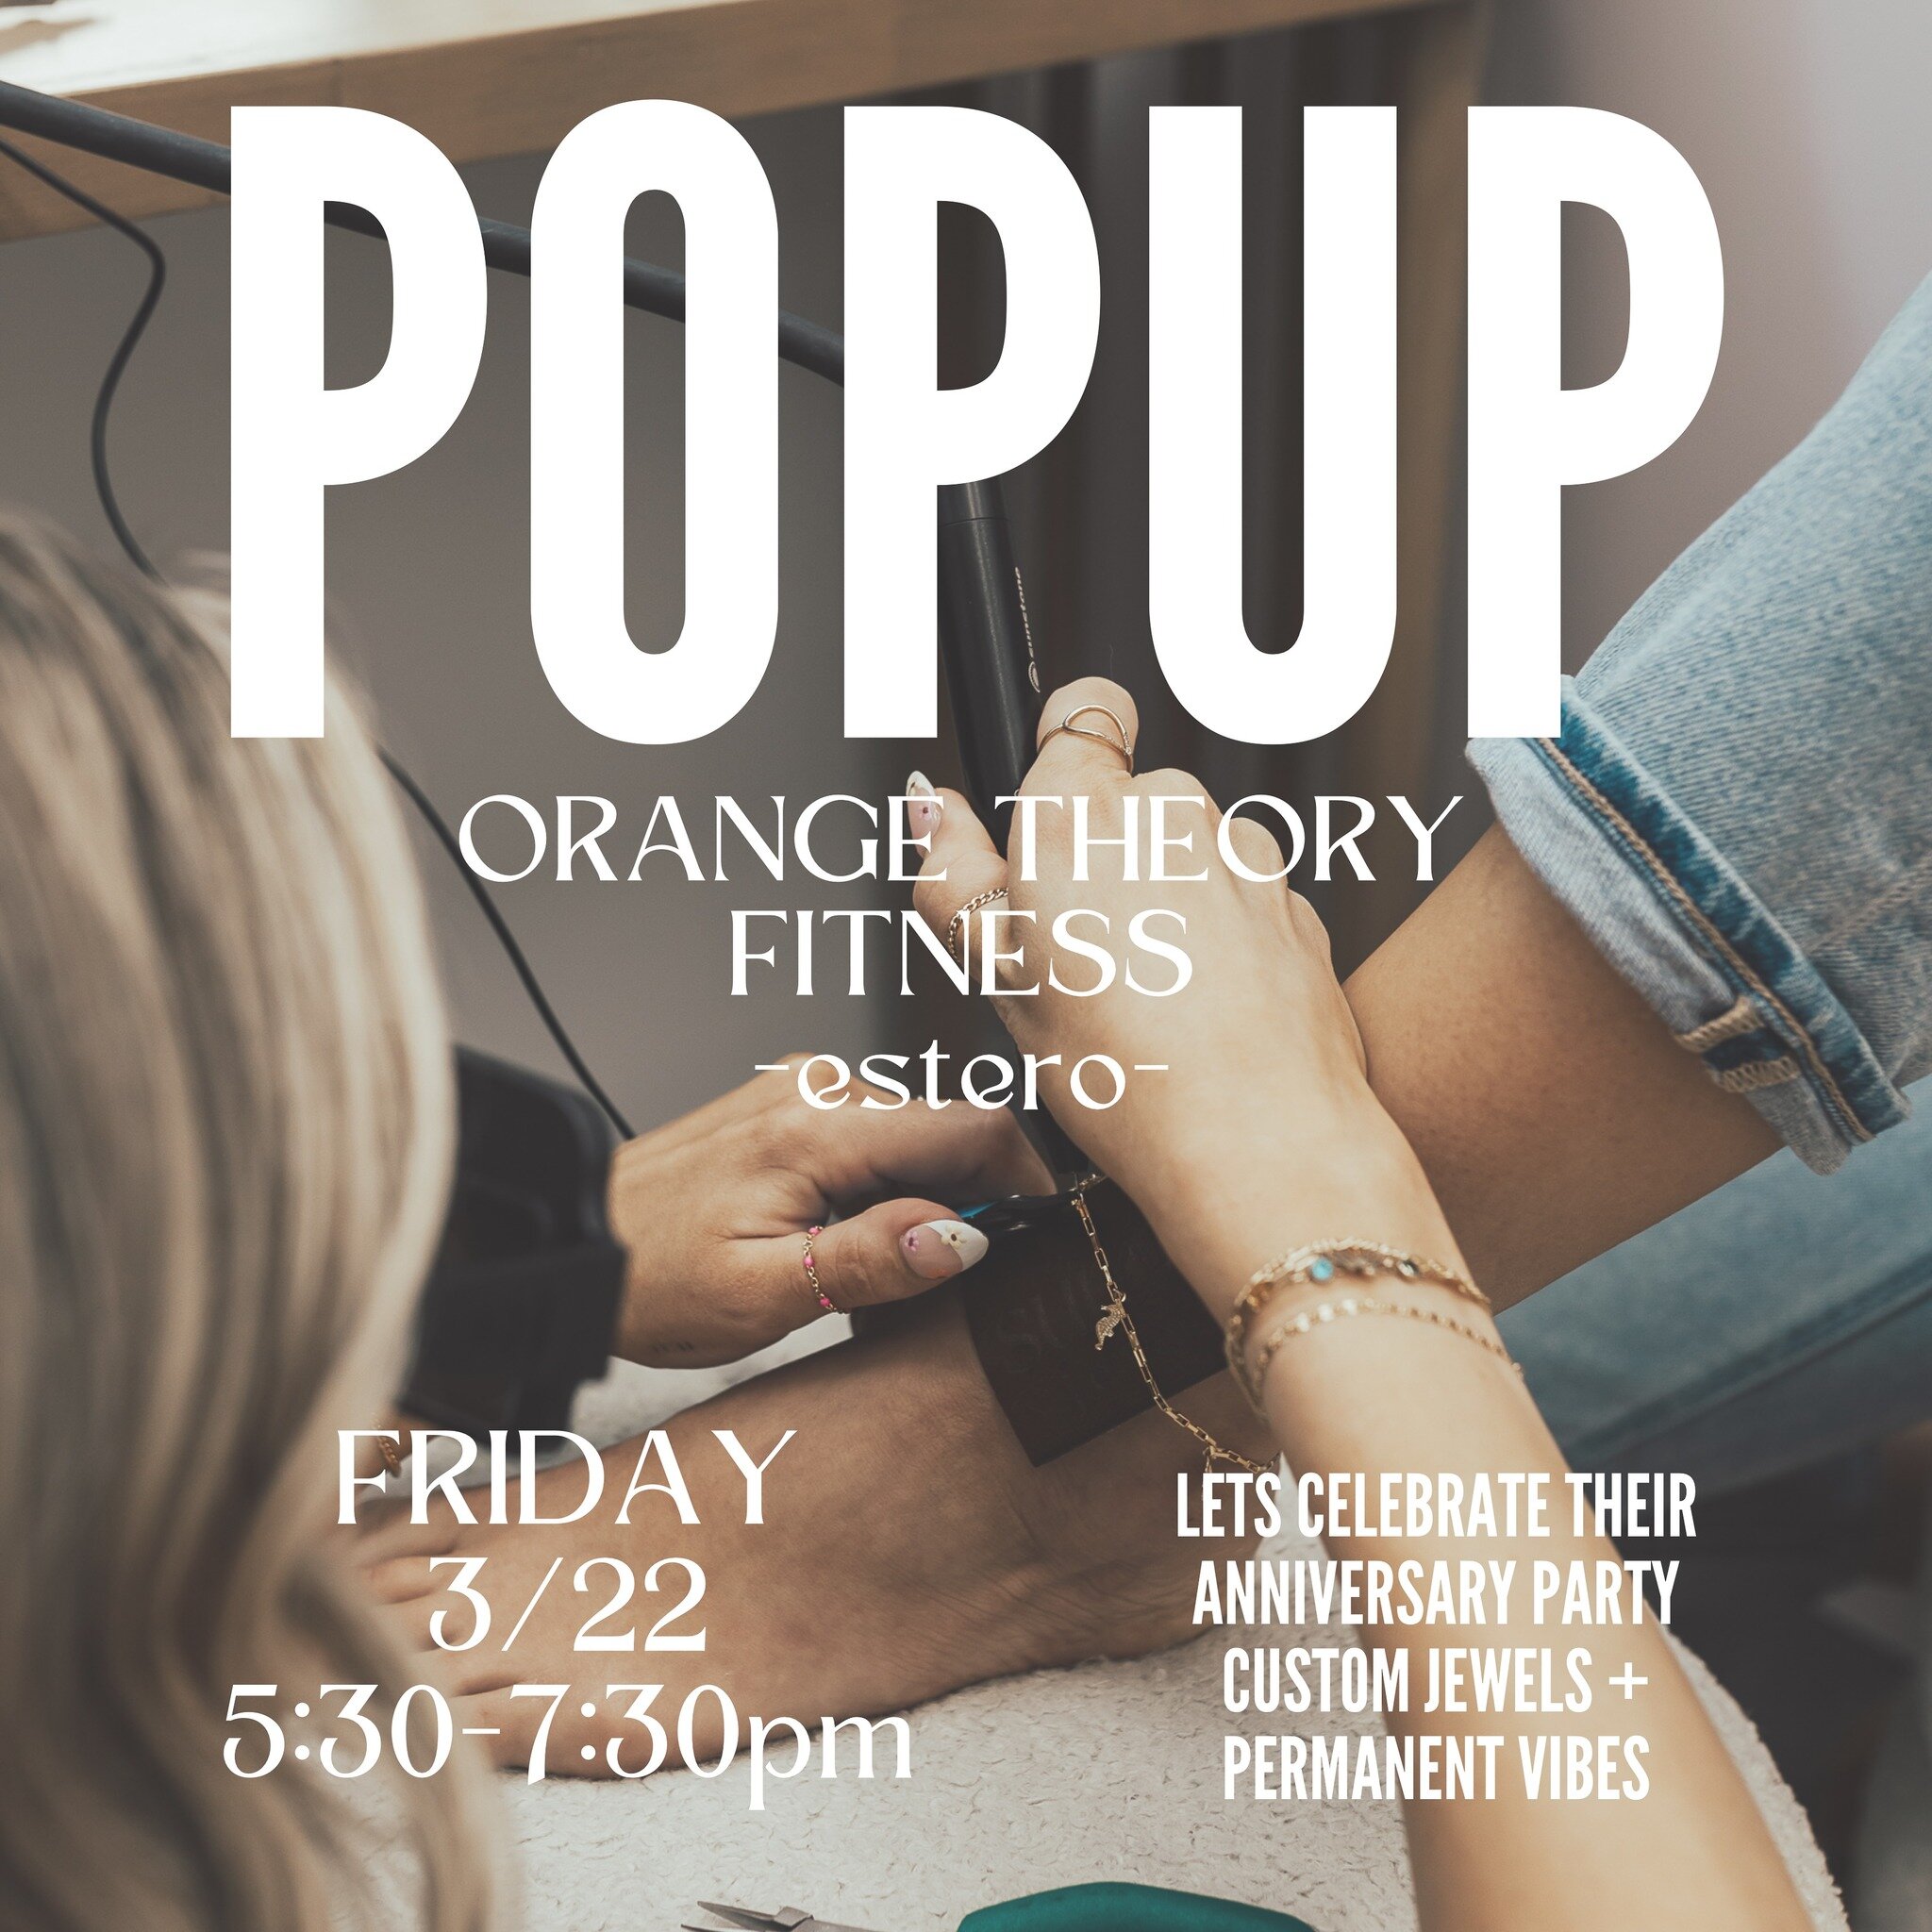 You&rsquo;ve been asking . . . @otfestero is the next spot we&rsquo;re popping up at! 
Bringing the permanent vibes to celebrate their anniversary party THIS Friday 3/22! We&rsquo;ll be there from 5:30-7:30pm along with some other vendors, all celebr